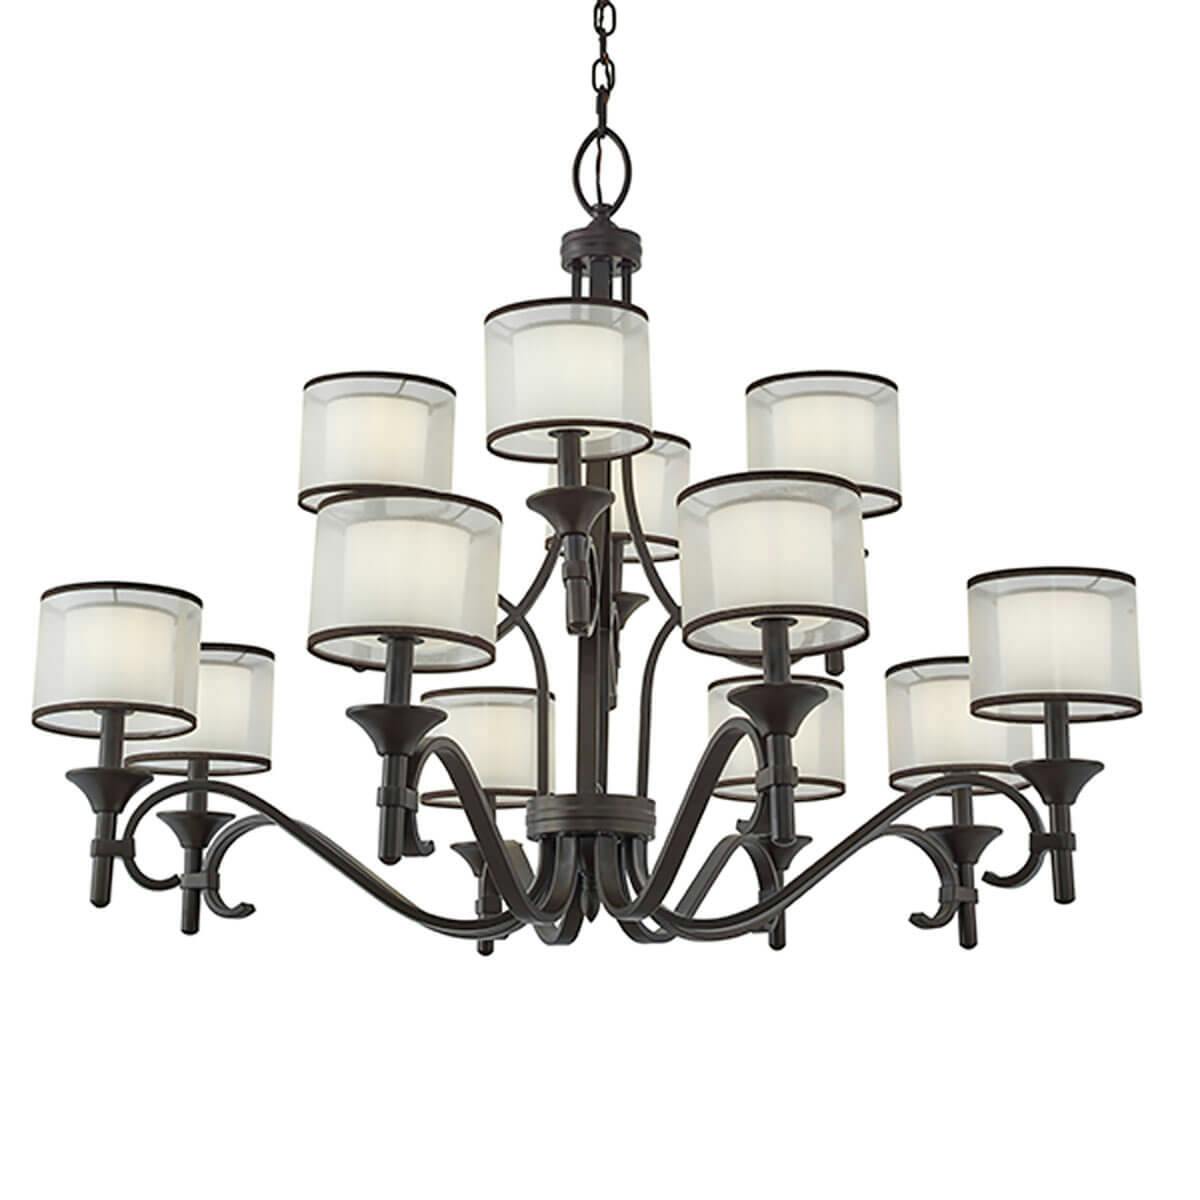 Lacey 12 Light 3 Tier Chandelier Bronze without the canopy on a white background